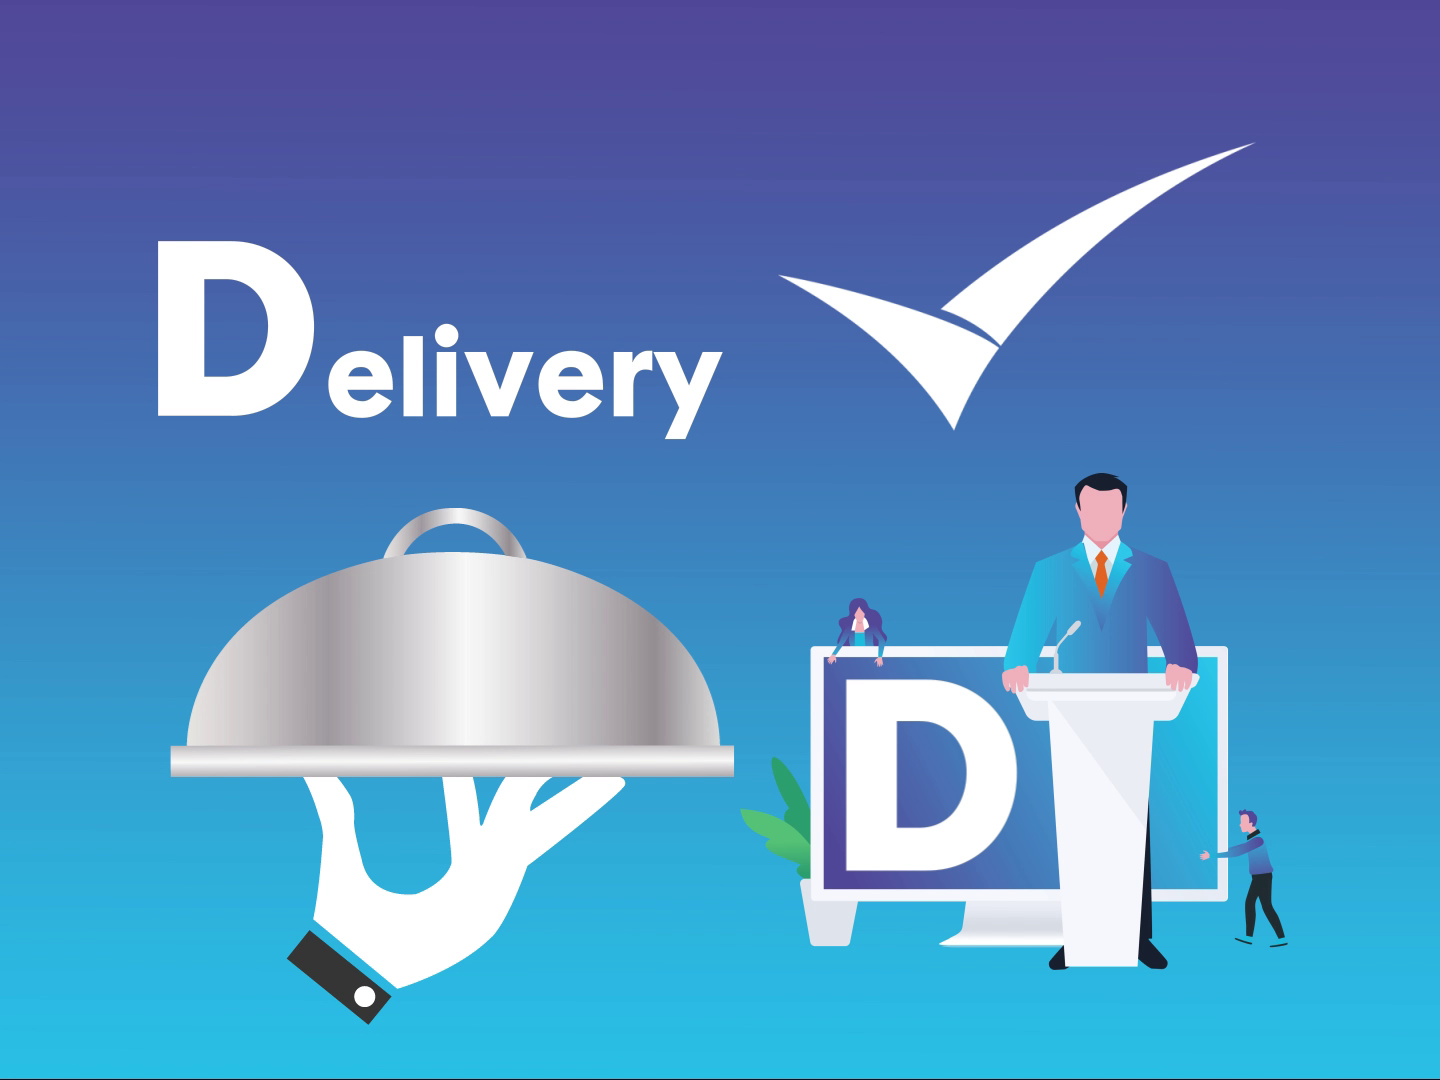 D for Delivery